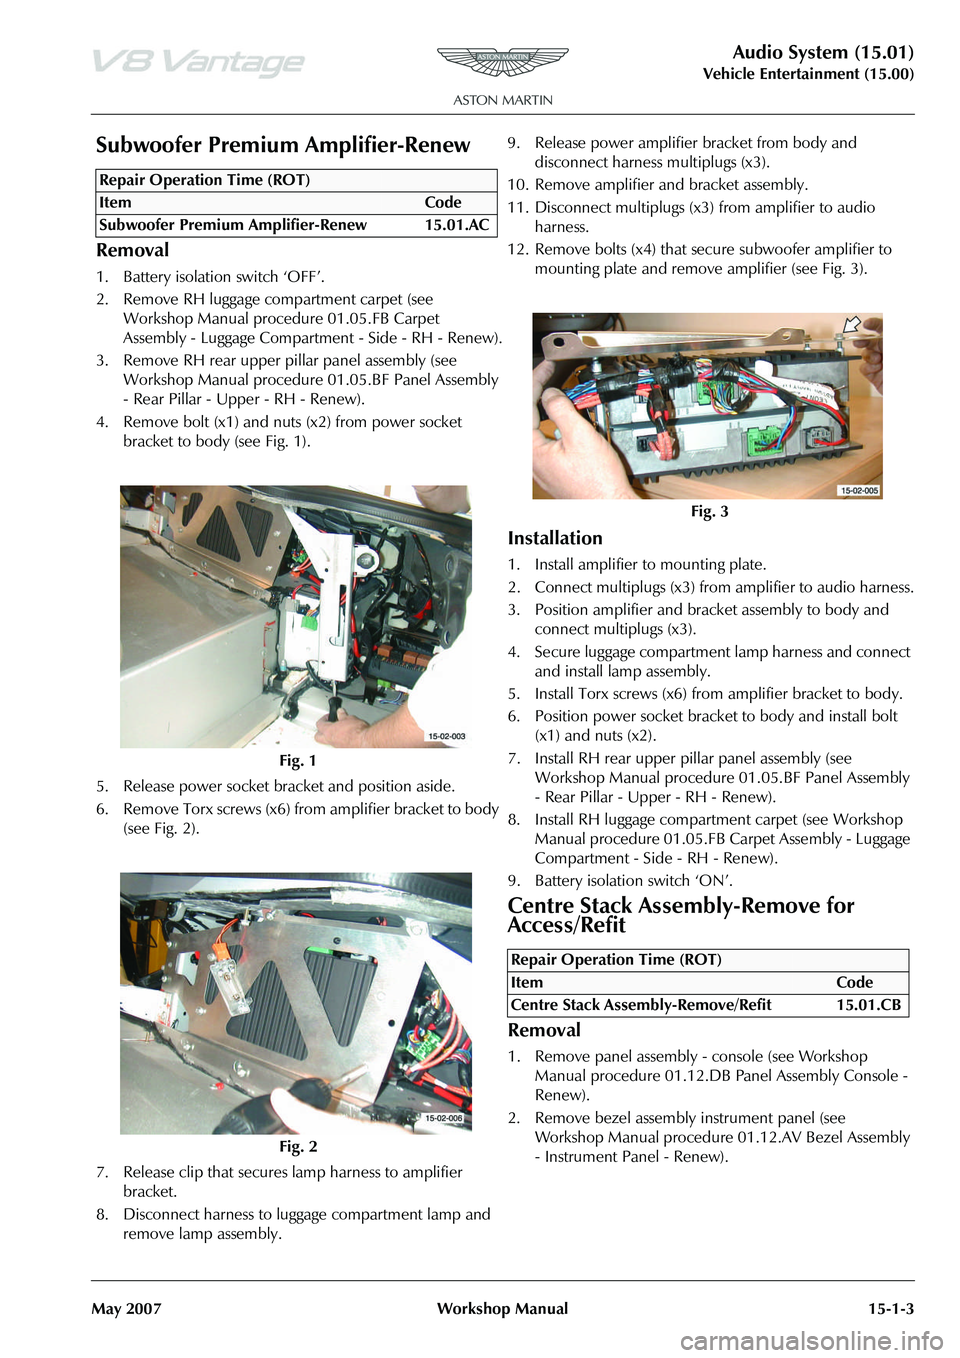 ASTON MARTIN V8 VANTAGE 2010  Workshop Manual Audio System (15.01)
Vehicle Entertainment (15.00)
May 2007 Workshop Manual 15-1-3
Subwoofer Premium Amplifier-Renew
Removal
1. Battery isolation switch ‘OFF’.
2. Remove RH luggage compartment car